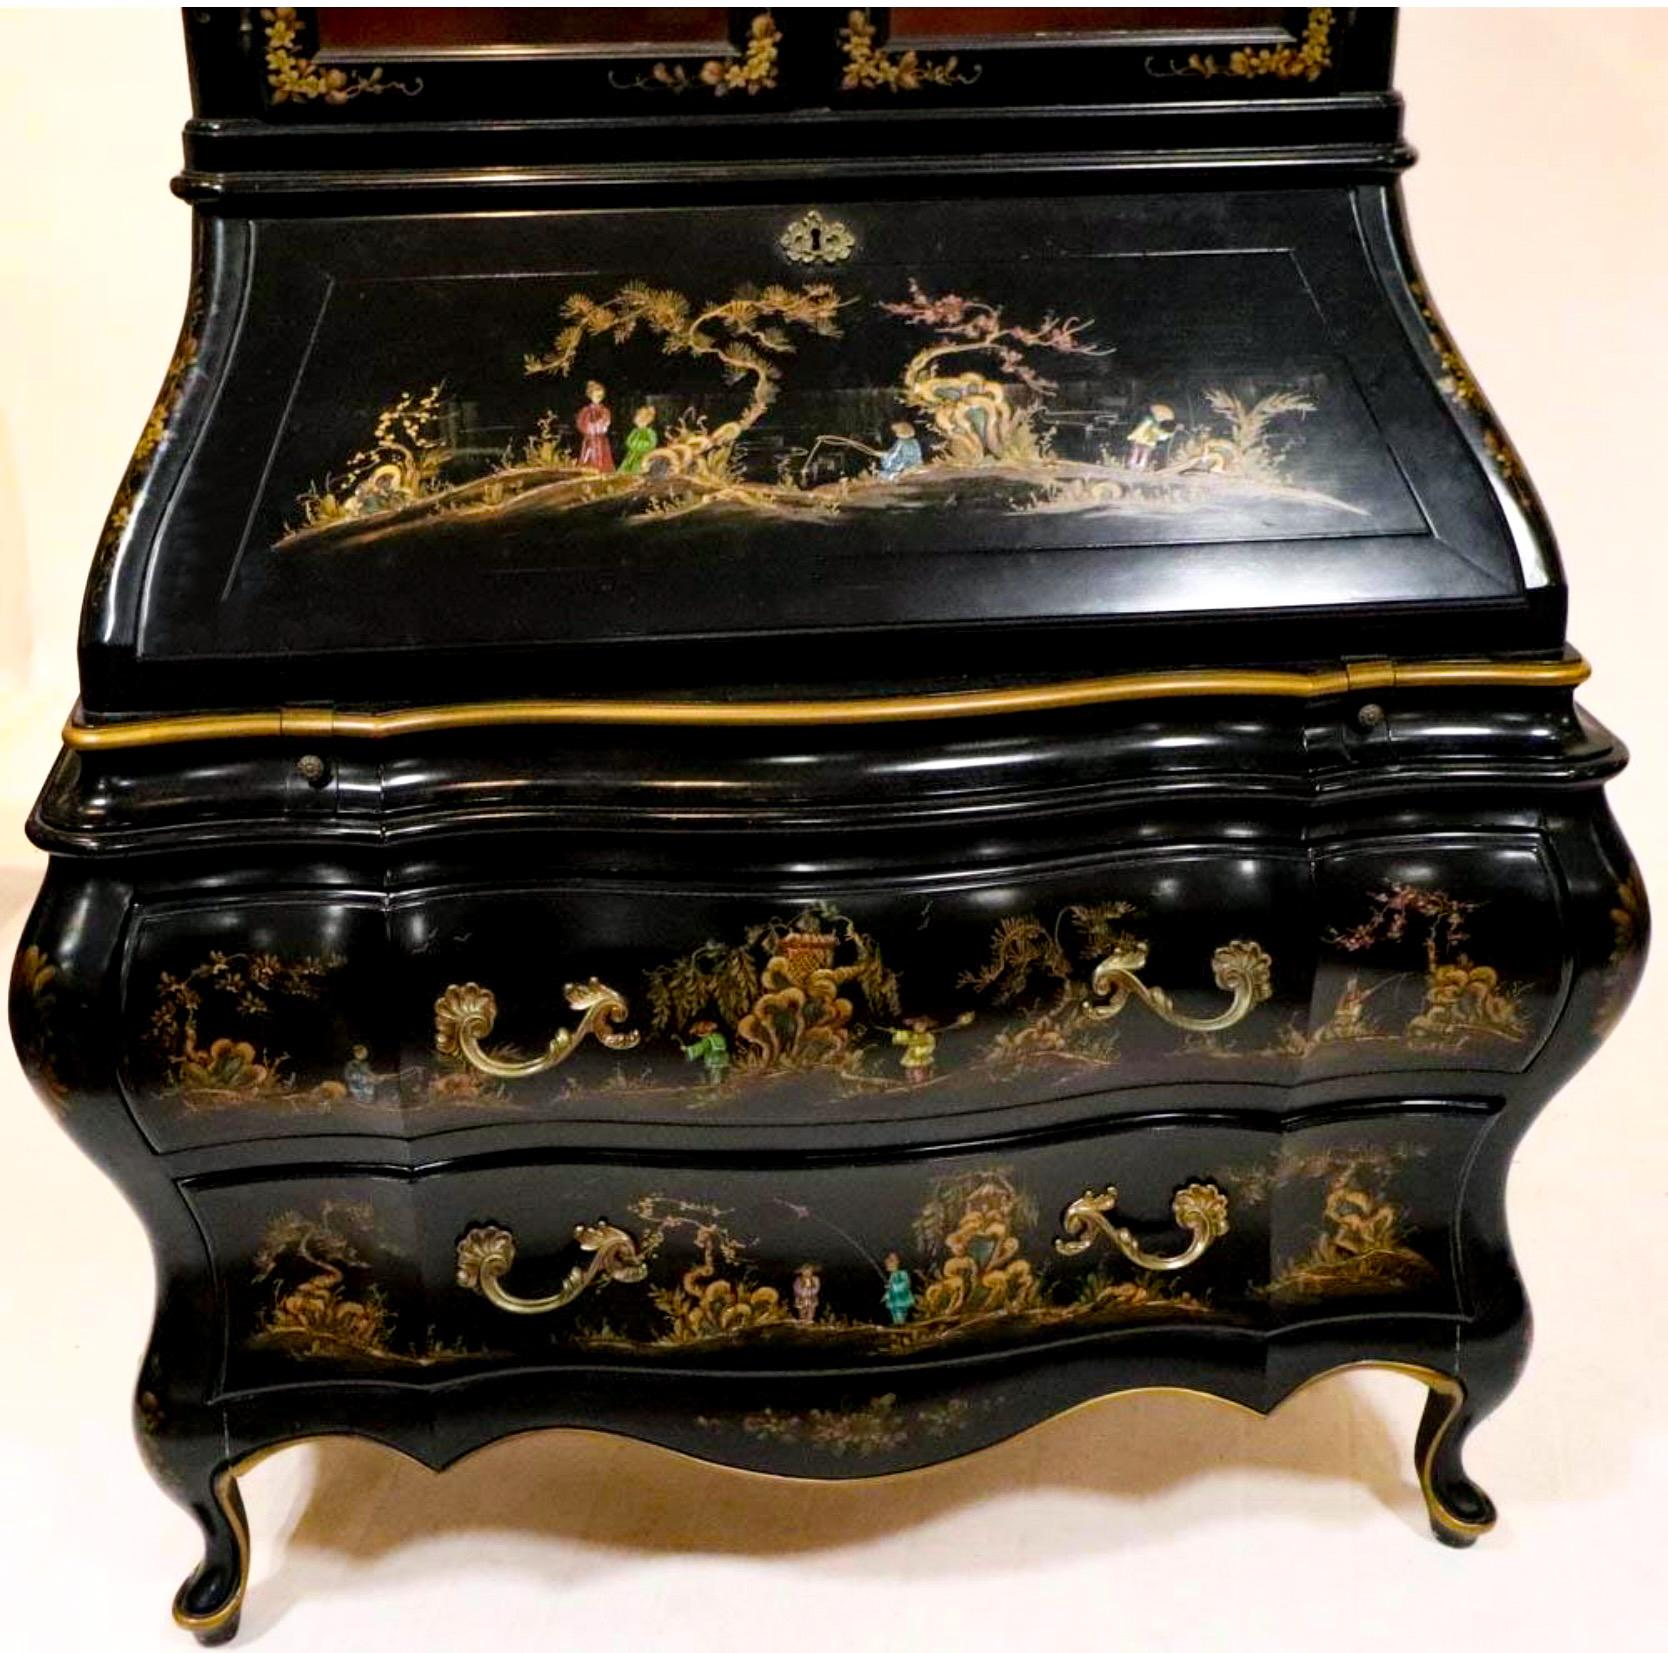 Midcentury French Style Black Lacquer Chinoiserie Secretary Desk / Cabinet In Good Condition For Sale In Kennesaw, GA